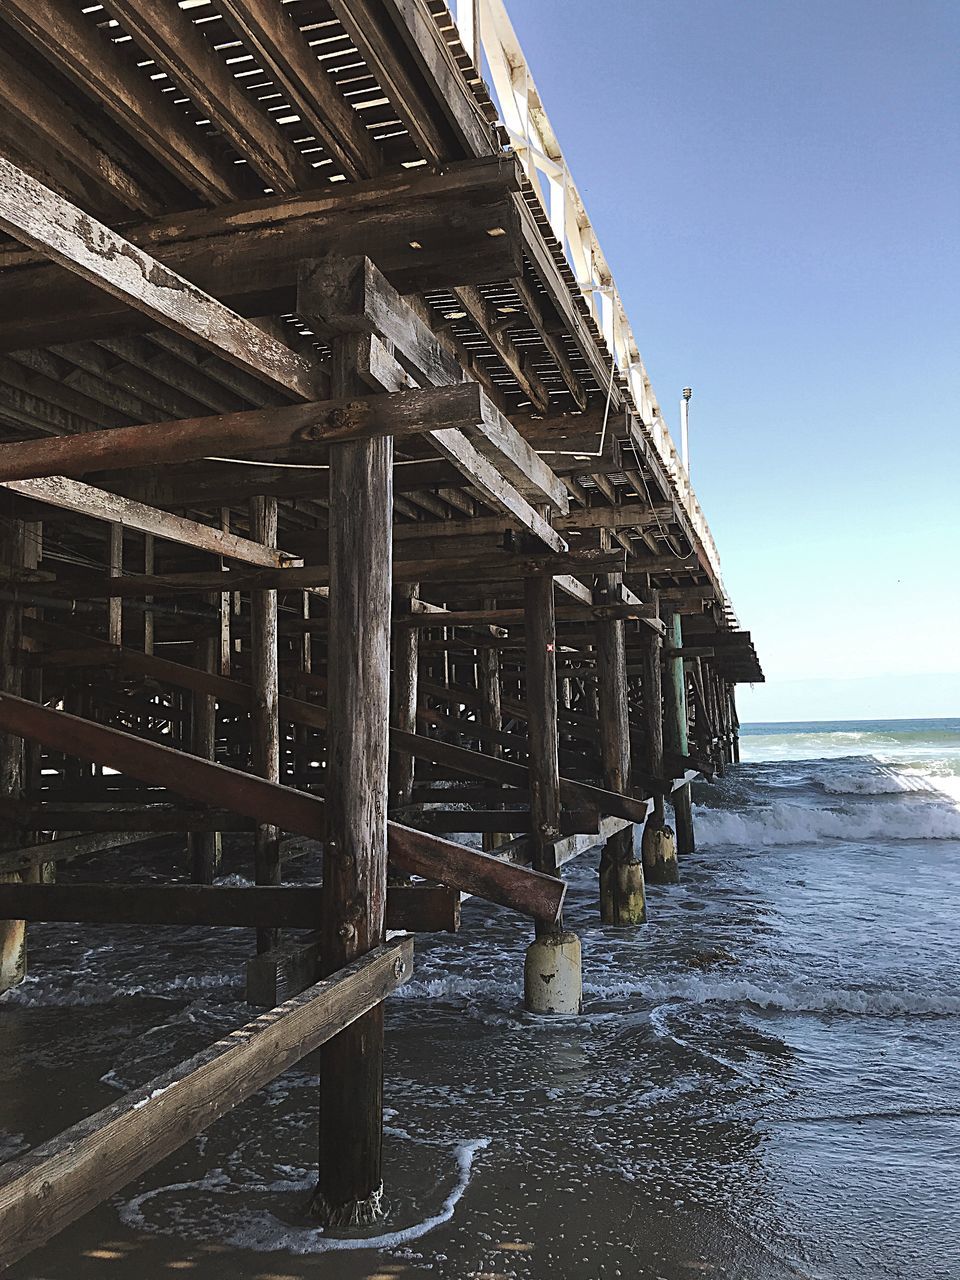 water, built structure, architecture, sea, wood - material, sky, nature, no people, beach, land, building exterior, day, building, pier, clear sky, tranquility, beauty in nature, scenics - nature, outdoors, horizon over water, architectural column, wooden post